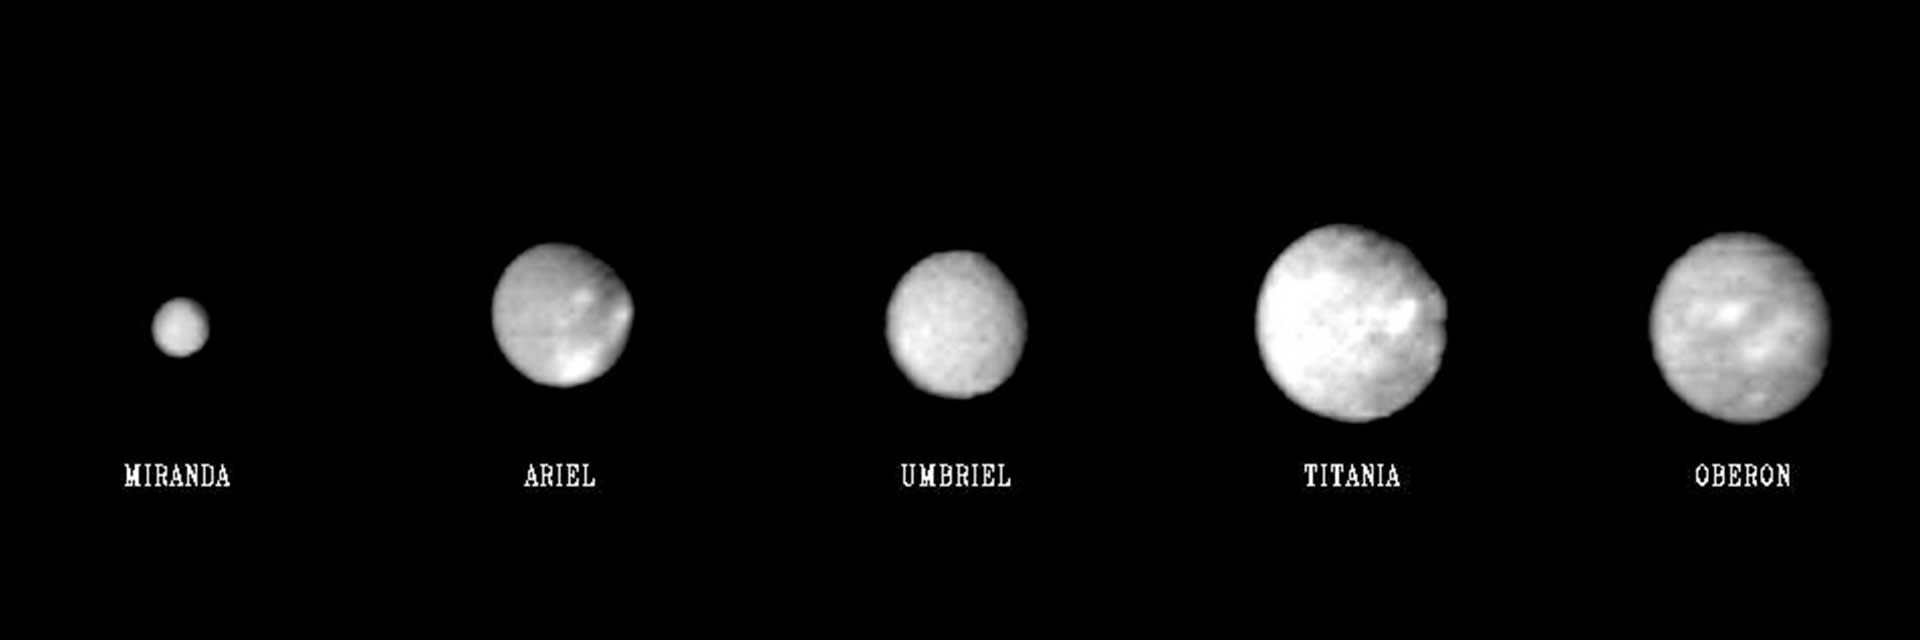 A panel showing the five major moons of Uranus